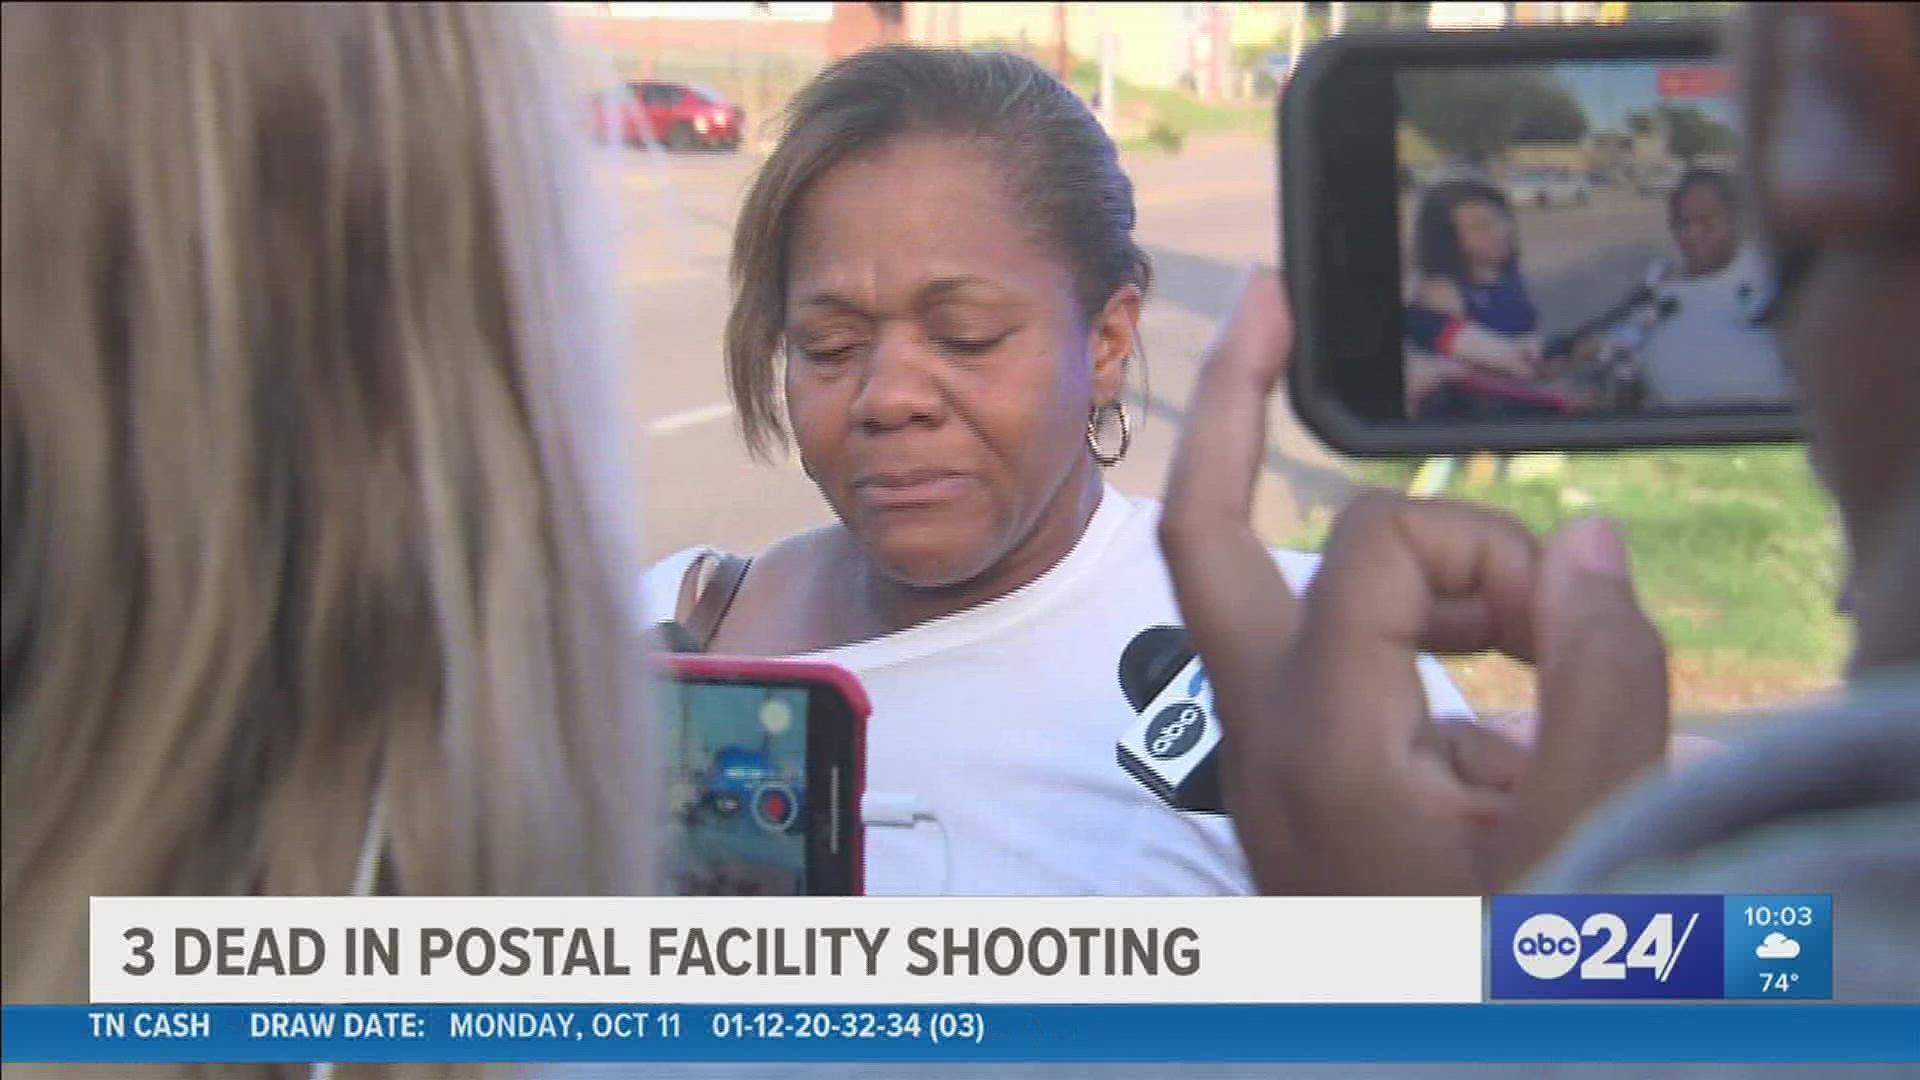 The FBI confirms the shooter, who was a USPS employee, shot and killed two other workers then turned the gun on themself.